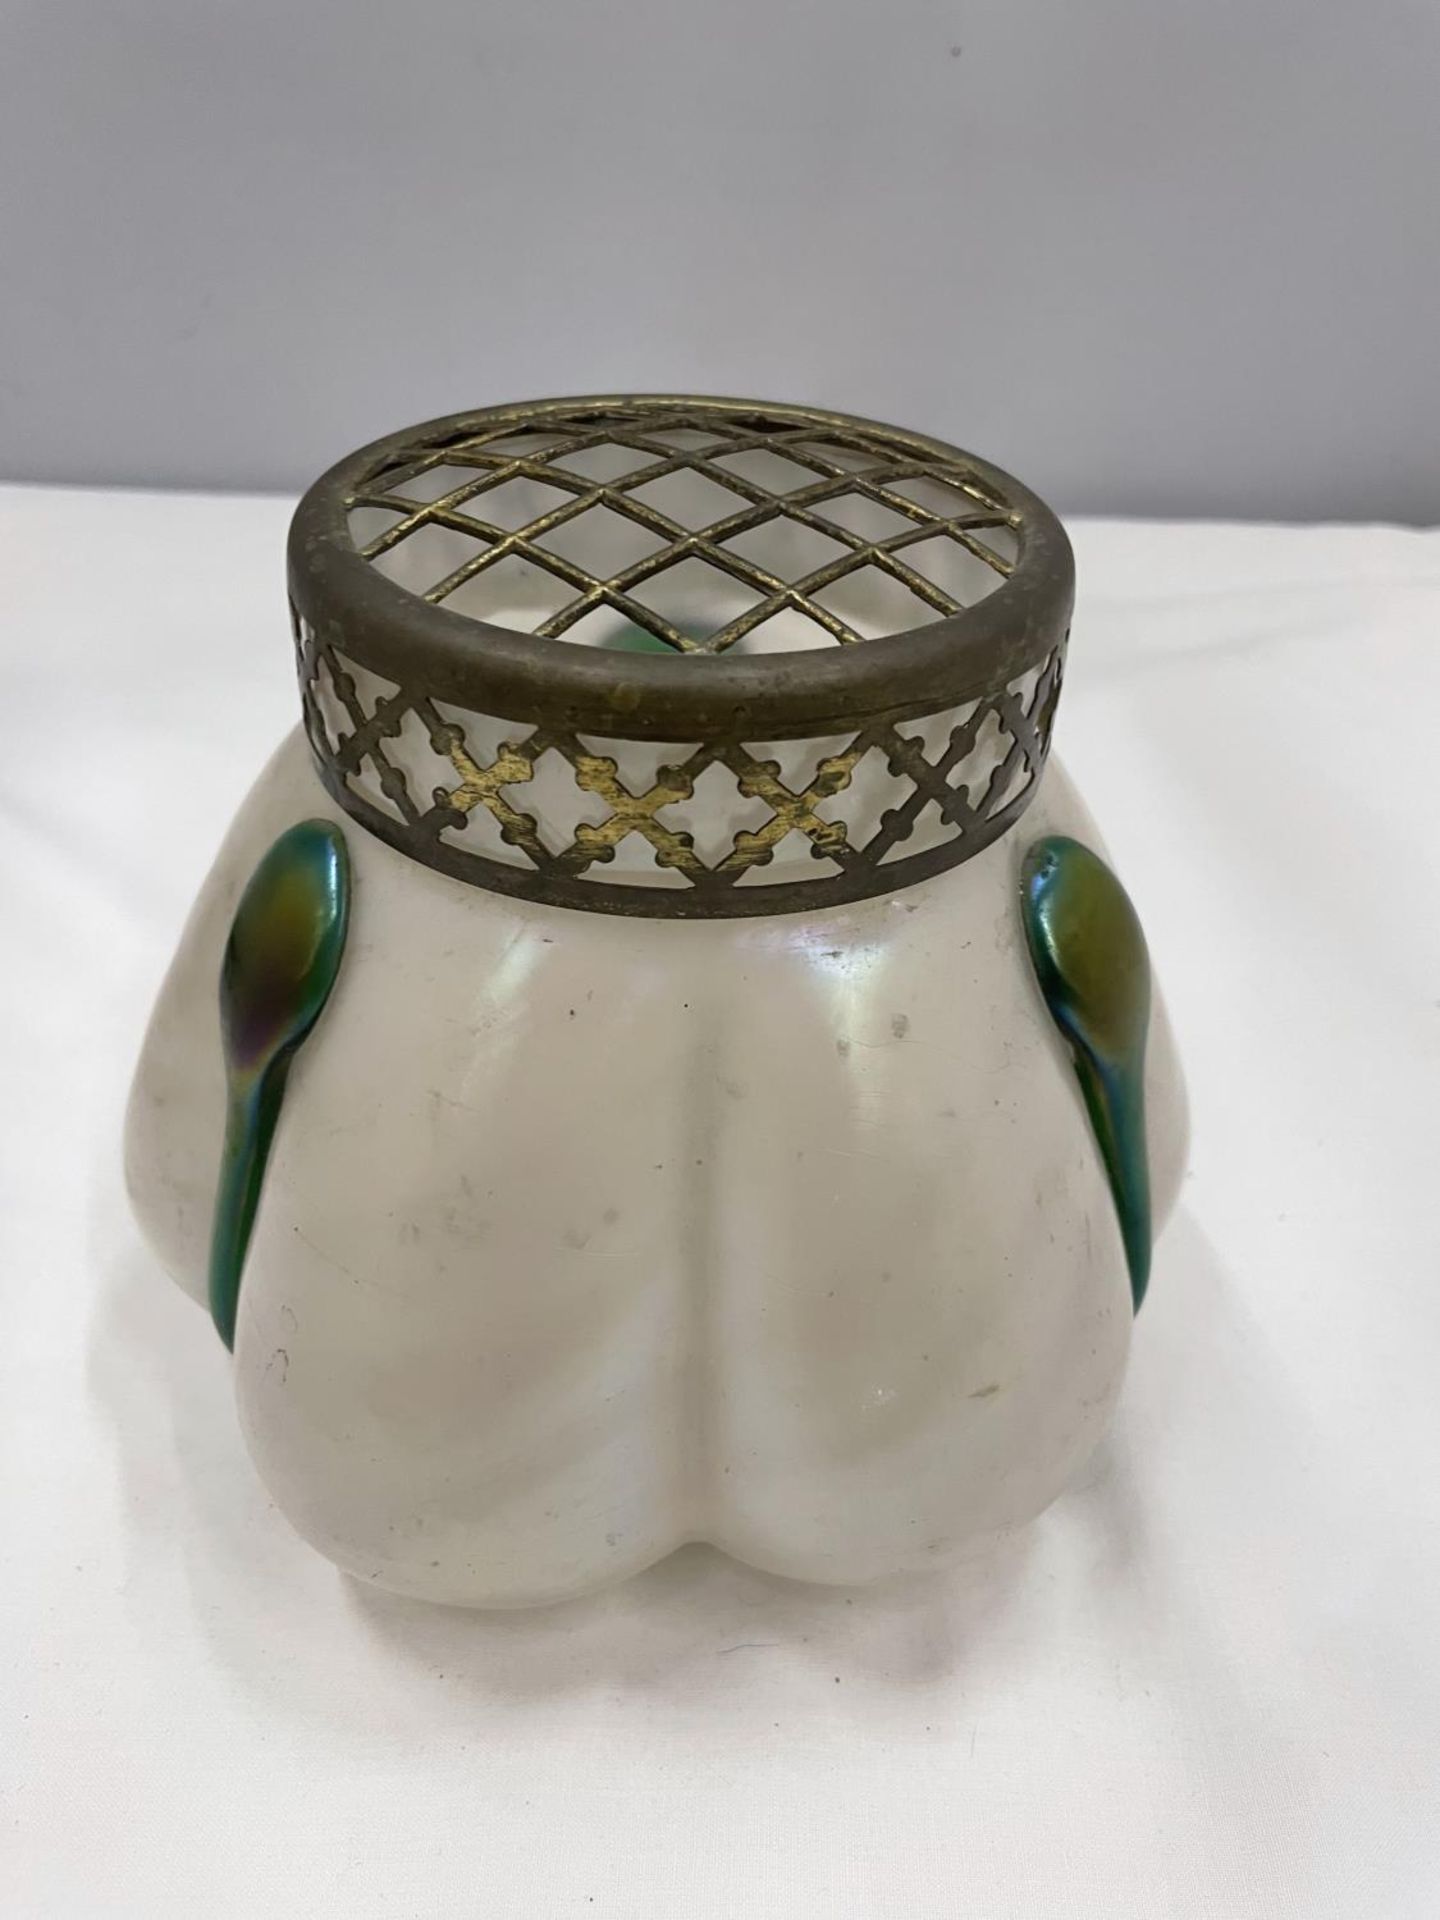 A CIRCA 1910 LOETZ MELON IRIDESCENT PEARL ART GLASS VASE WITH APPLIED GREEN TENDRILS AND A BRASS - Image 2 of 6